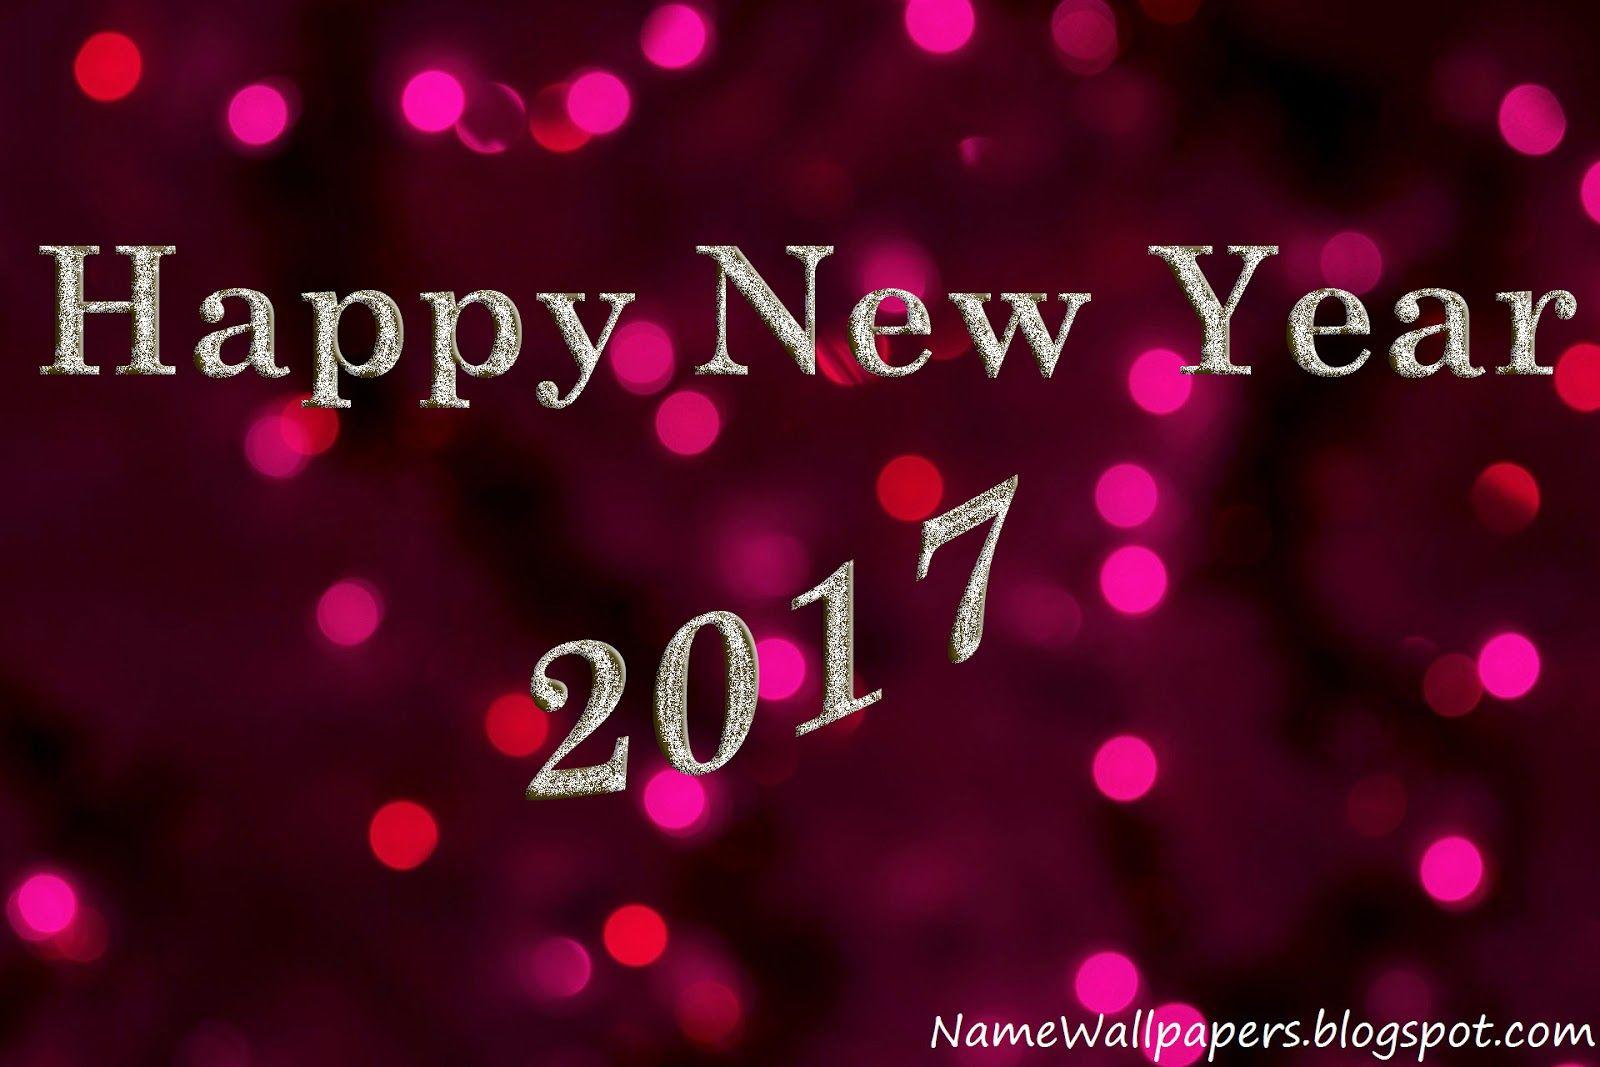 Happy New Year 2017 Wallpaper HD Image Picture 2017 Download